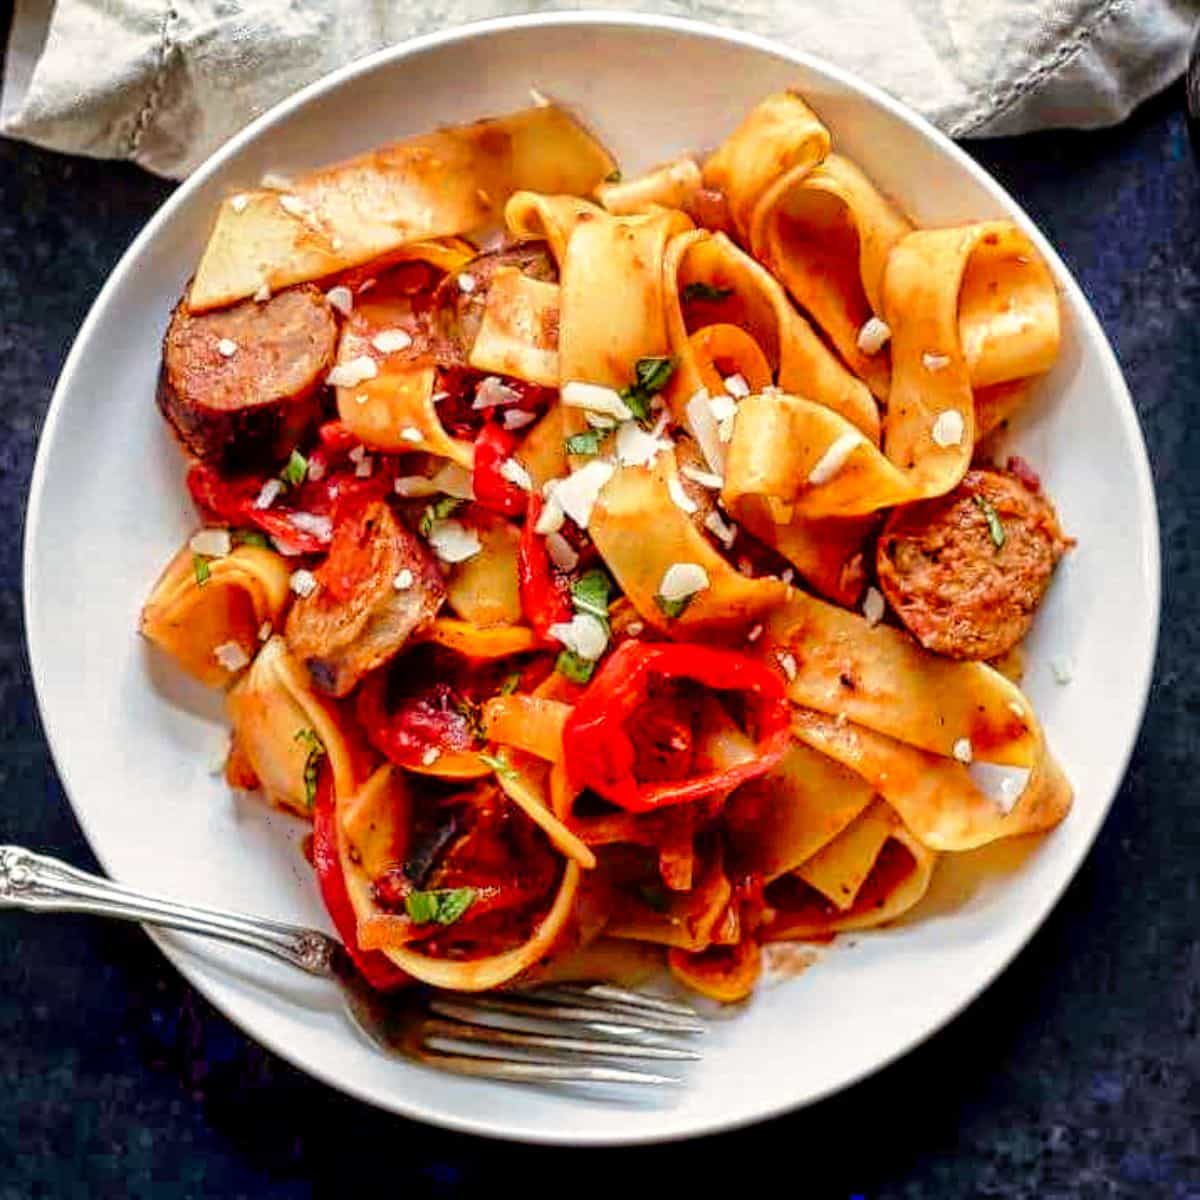 17. Tomato Pappardelle Pasta with Italian Sausage and Peppers